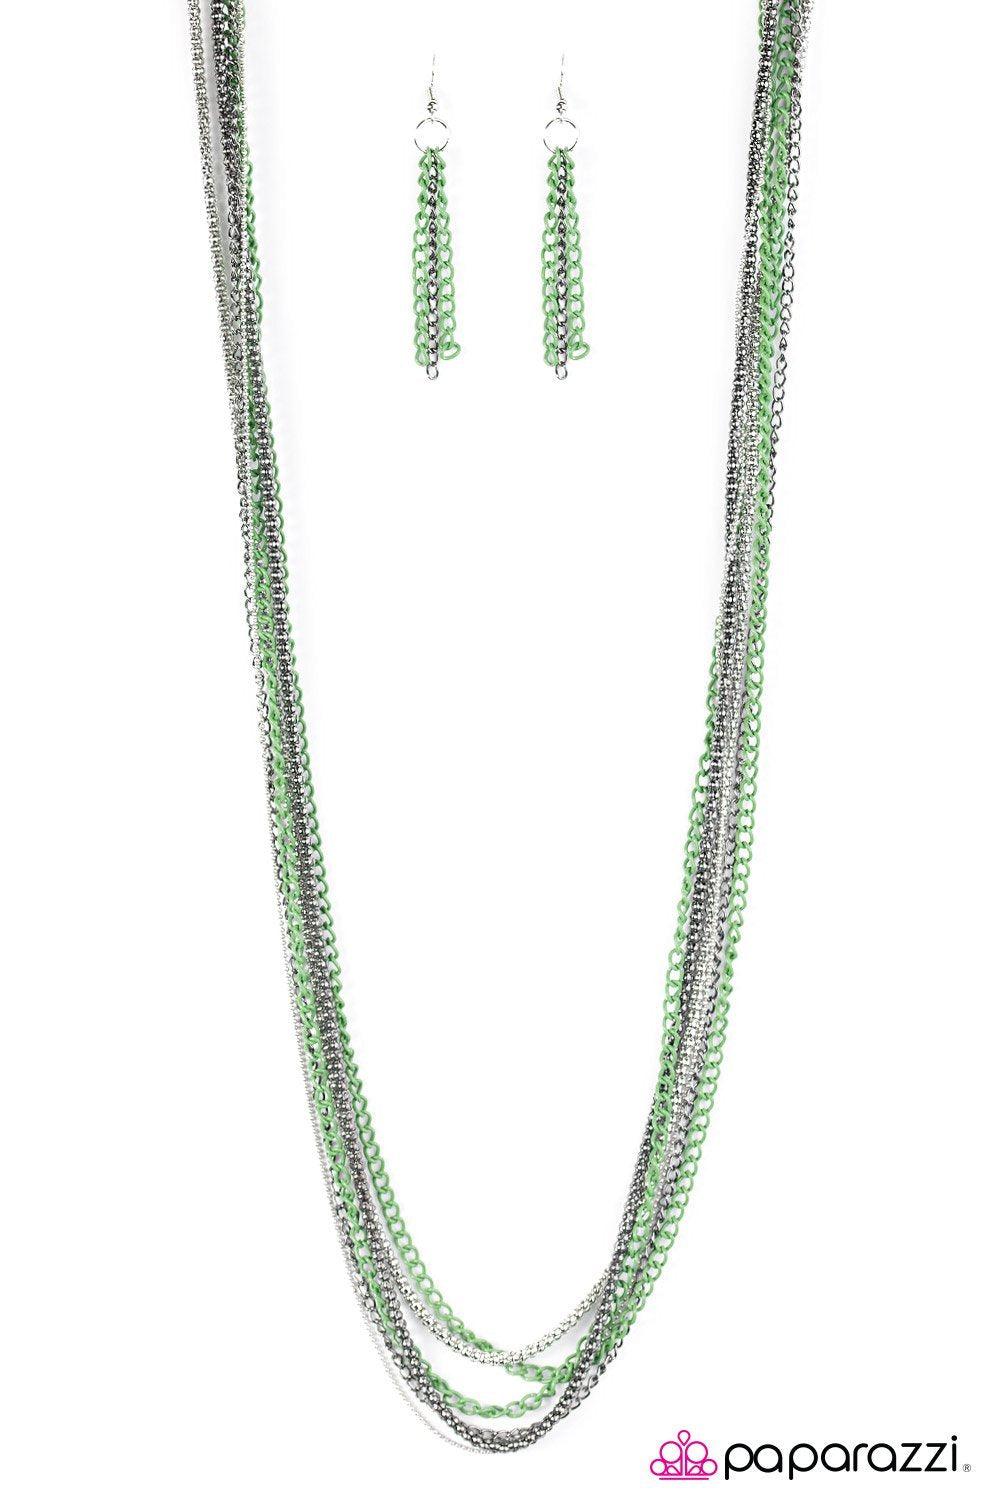 Colorful Calamity Silver, Gunmetal and Green Chain Necklace - Paparazzi Accessories-CarasShop.com - $5 Jewelry by Cara Jewels